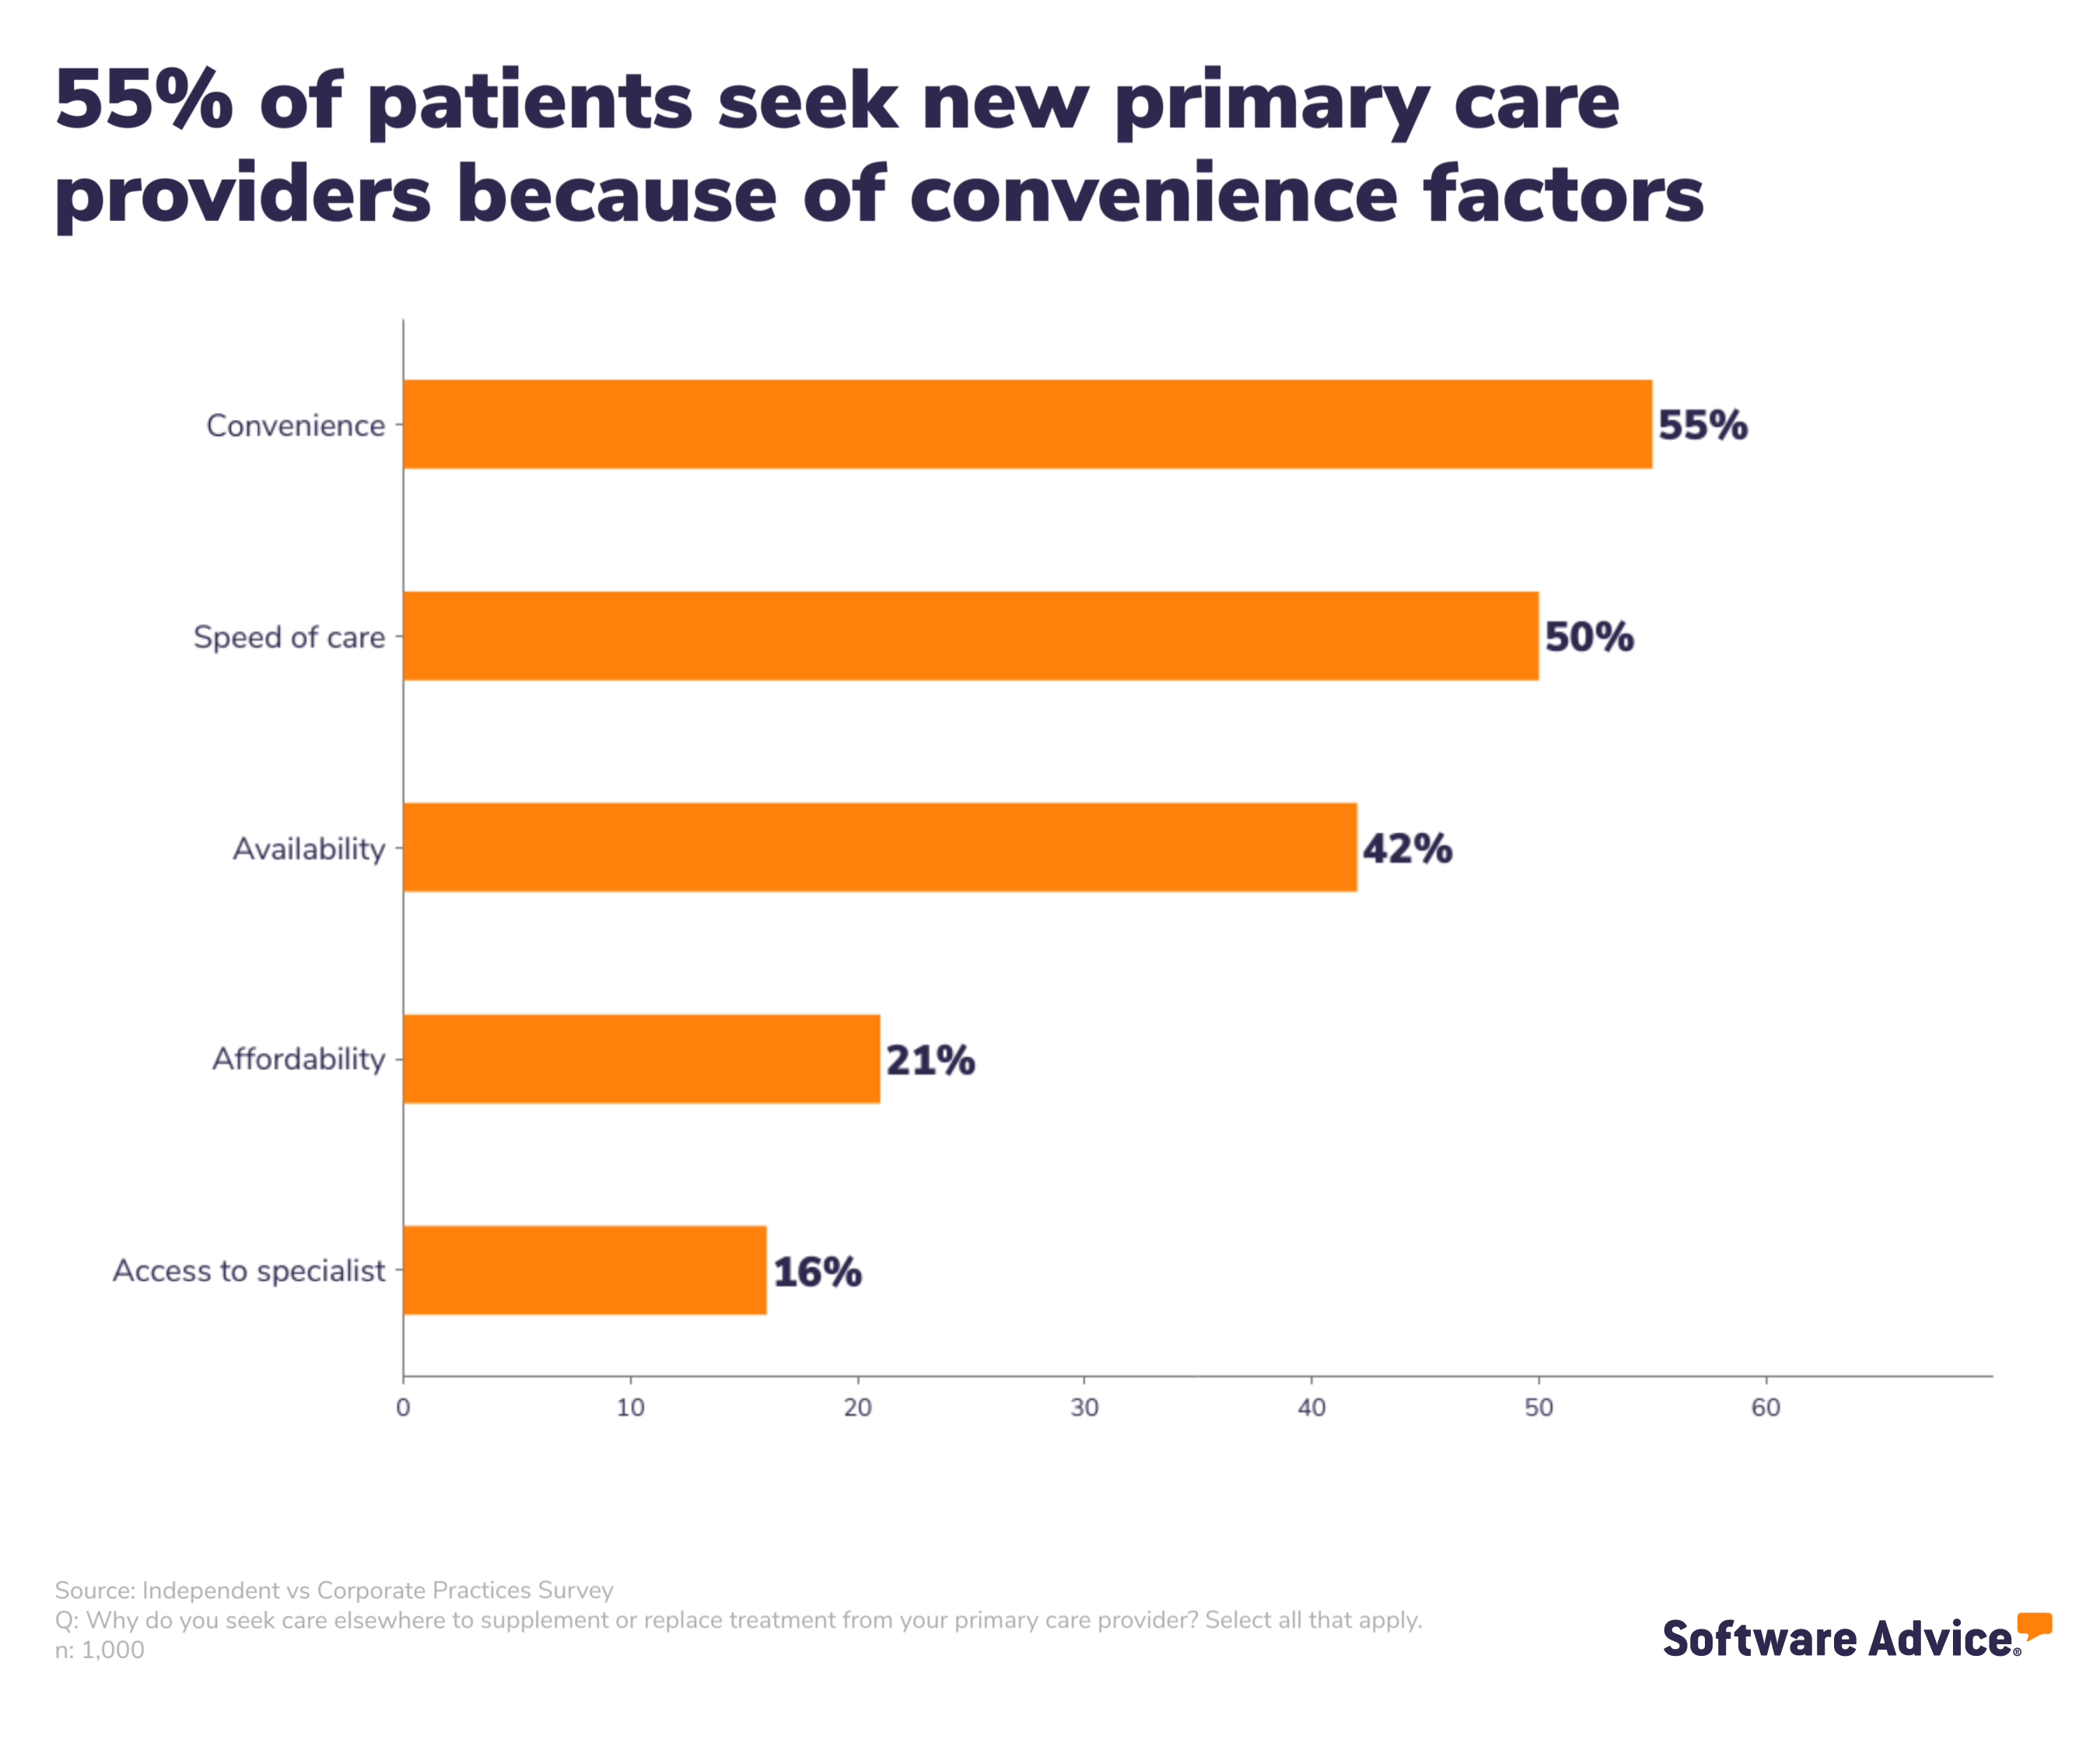 55% of patients seek new primary care providers because of convenience factors